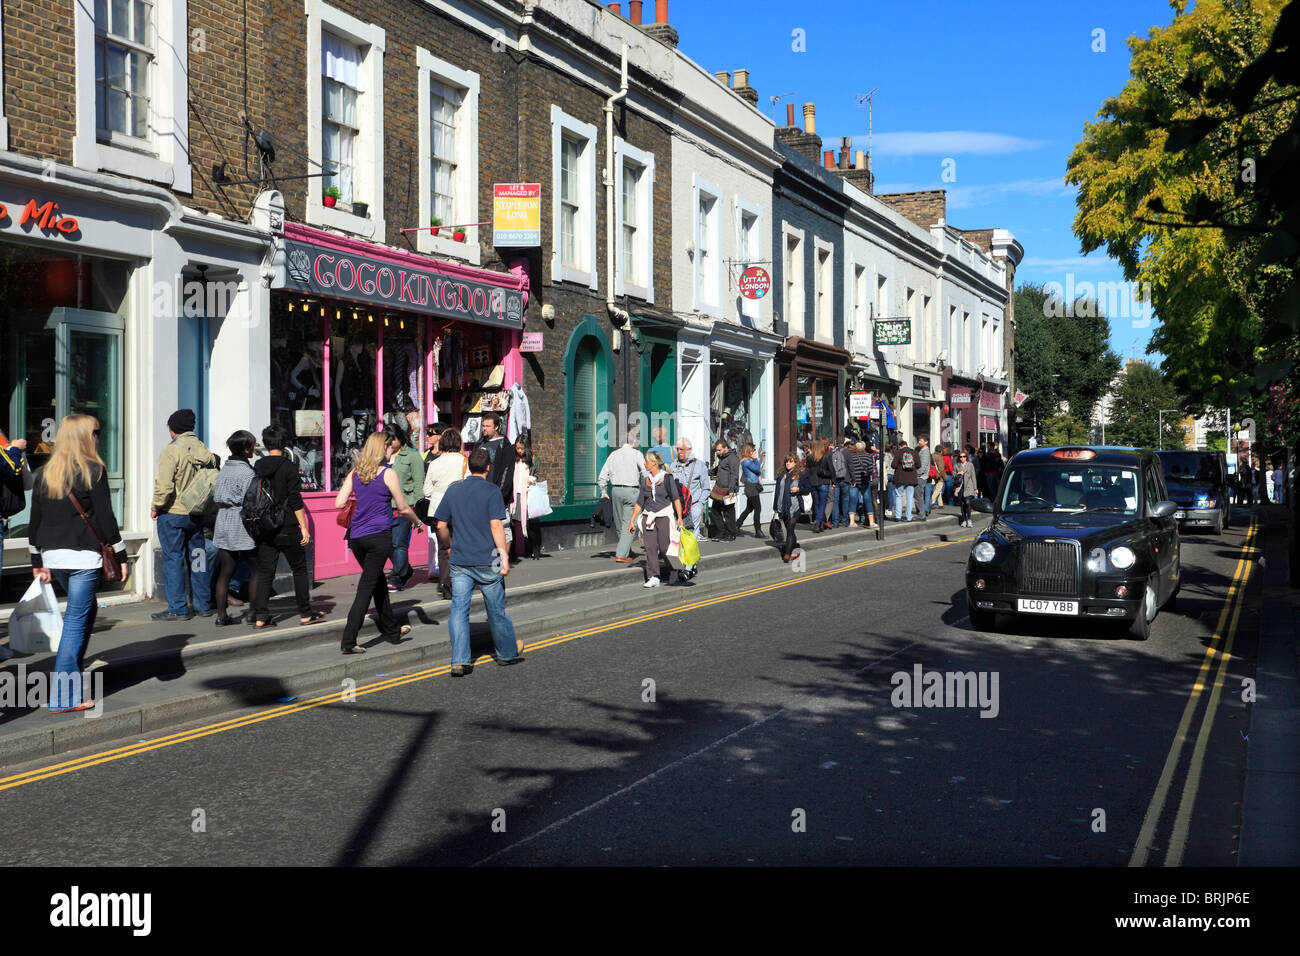 Shopping in Notting Hill Gate London Stock Photo